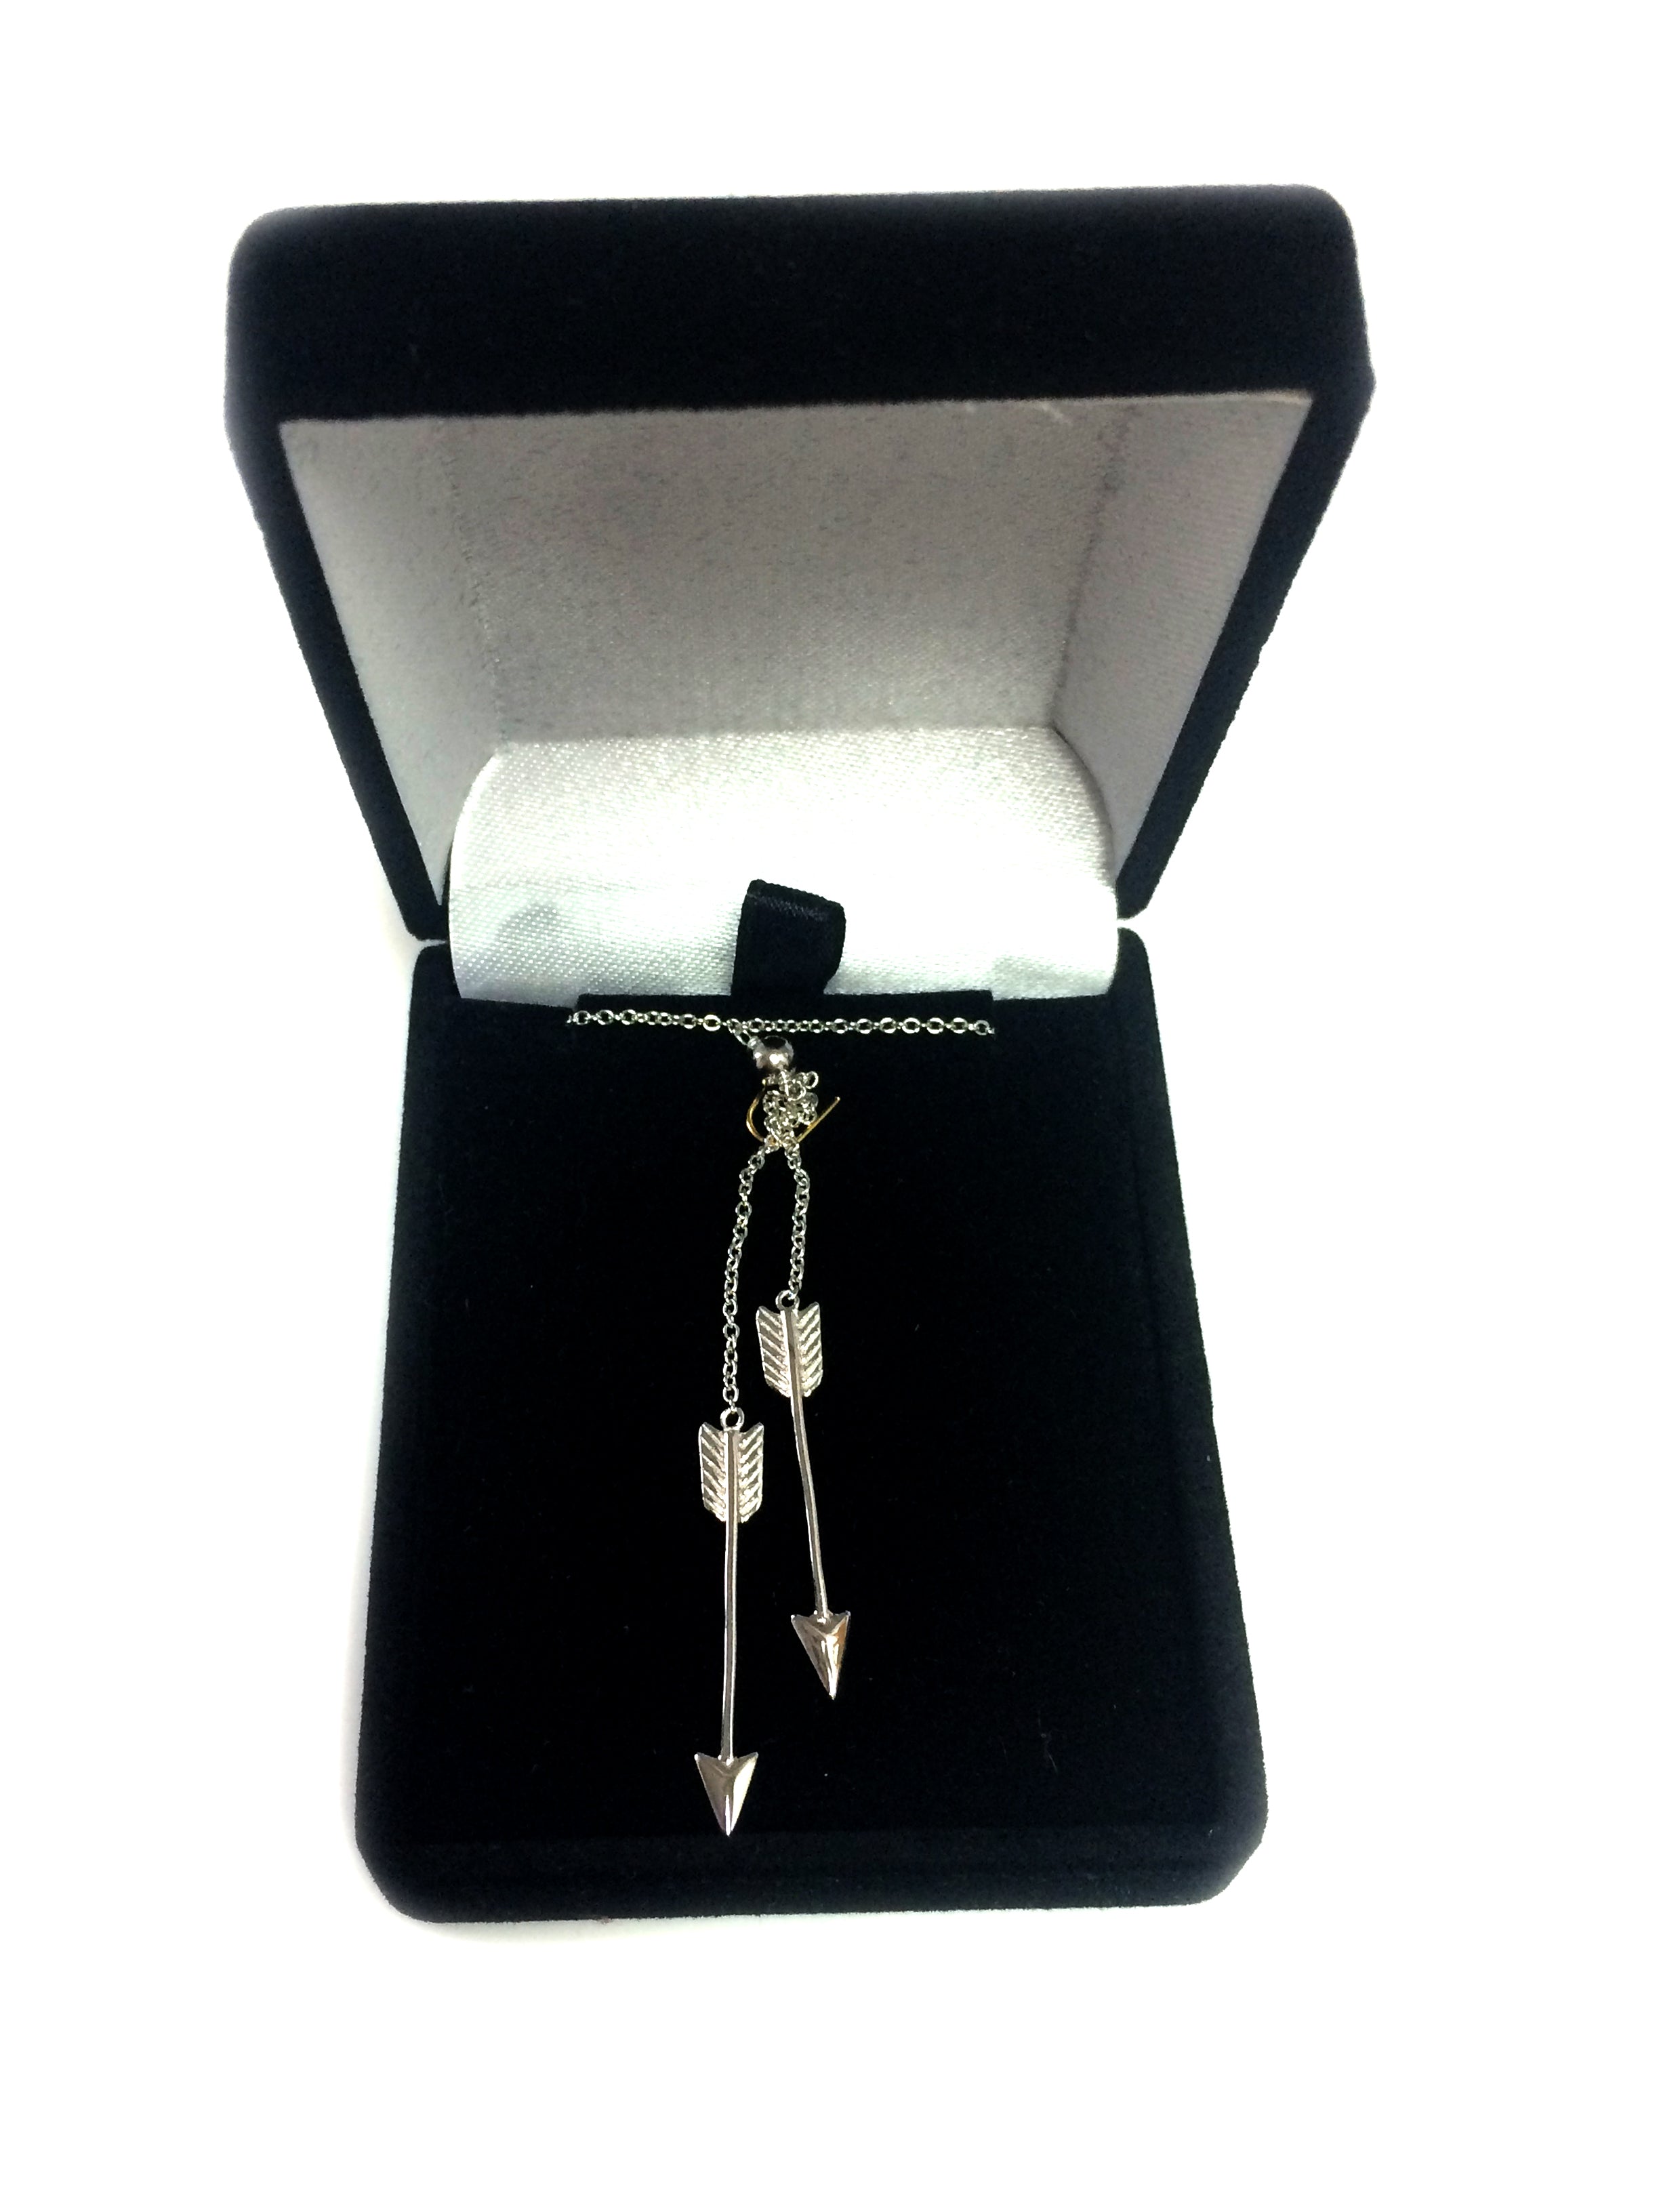 Sterling Silver Double Hanging Arrow Lariat Style Necklace, 18" fine designer jewelry for men and women